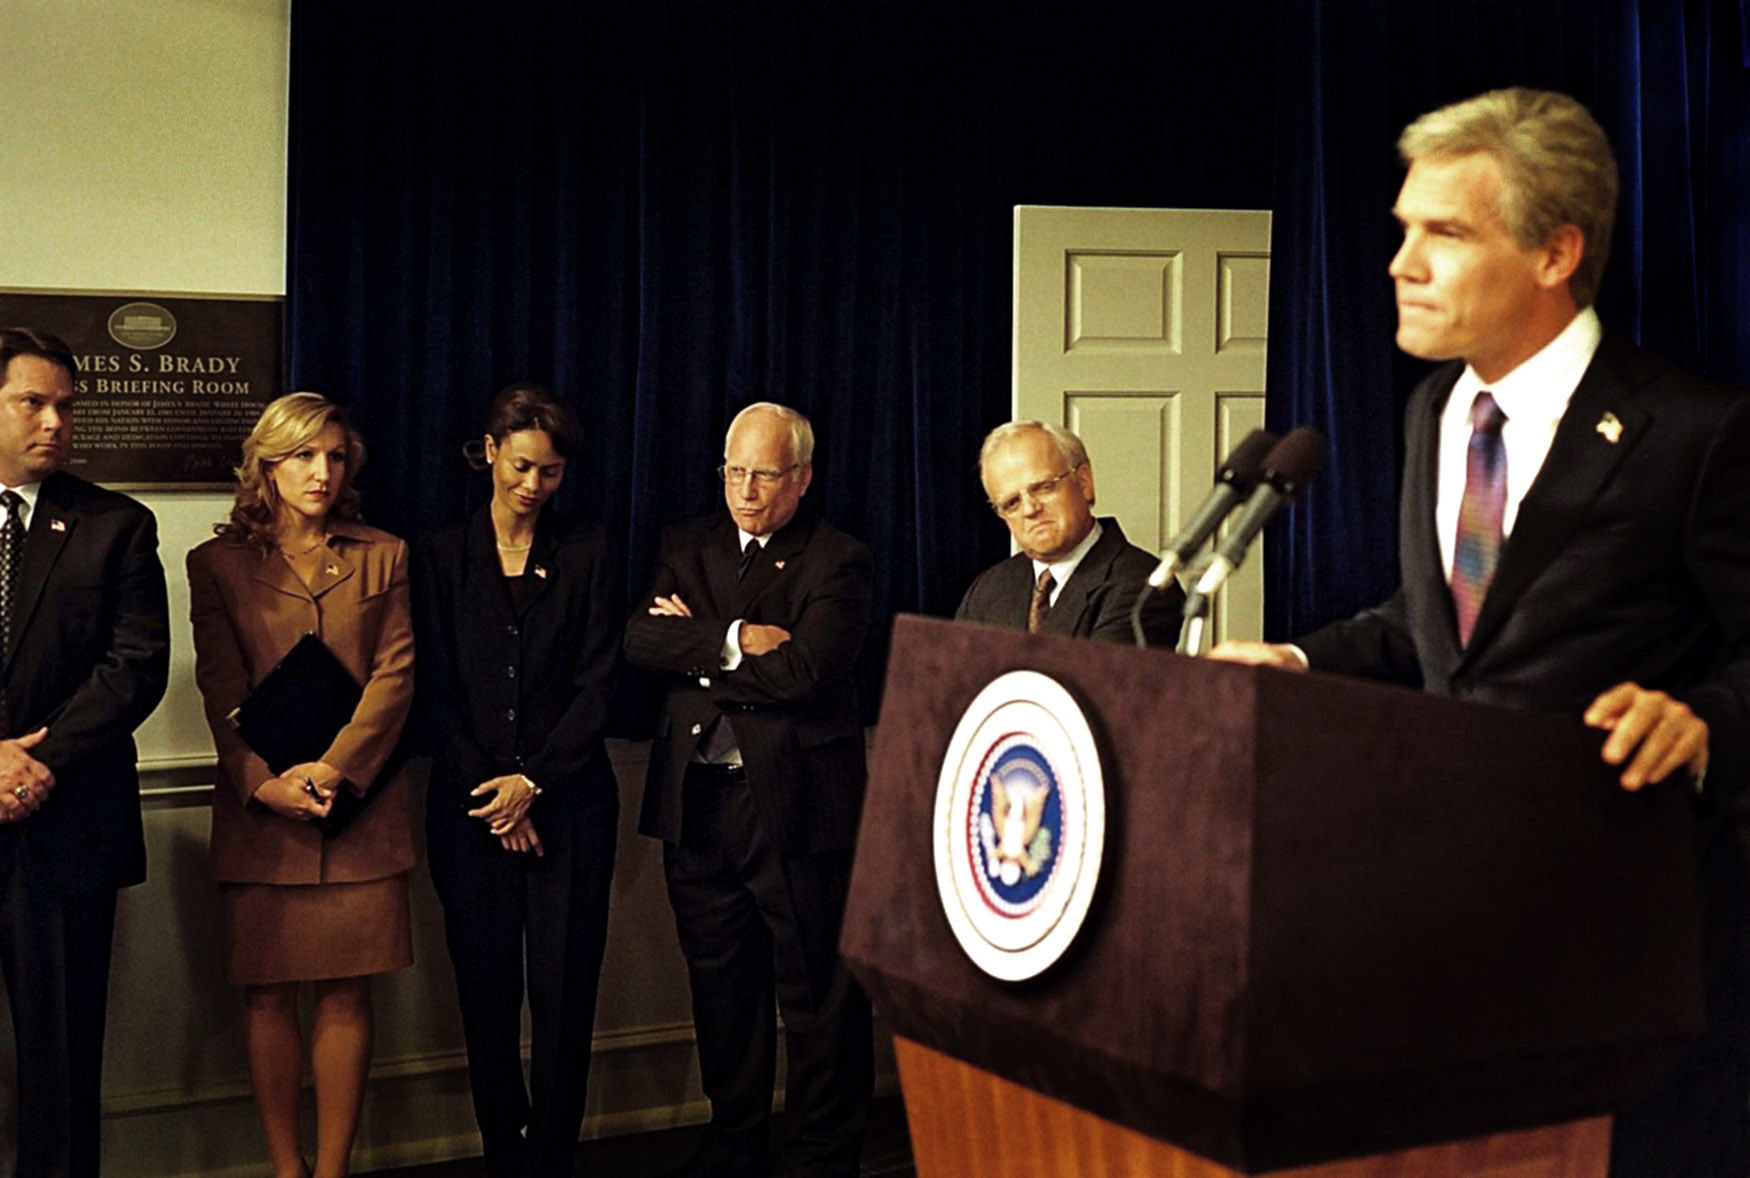 The cast of W. watching as Josh Brolin as George Bush speaks at a podium